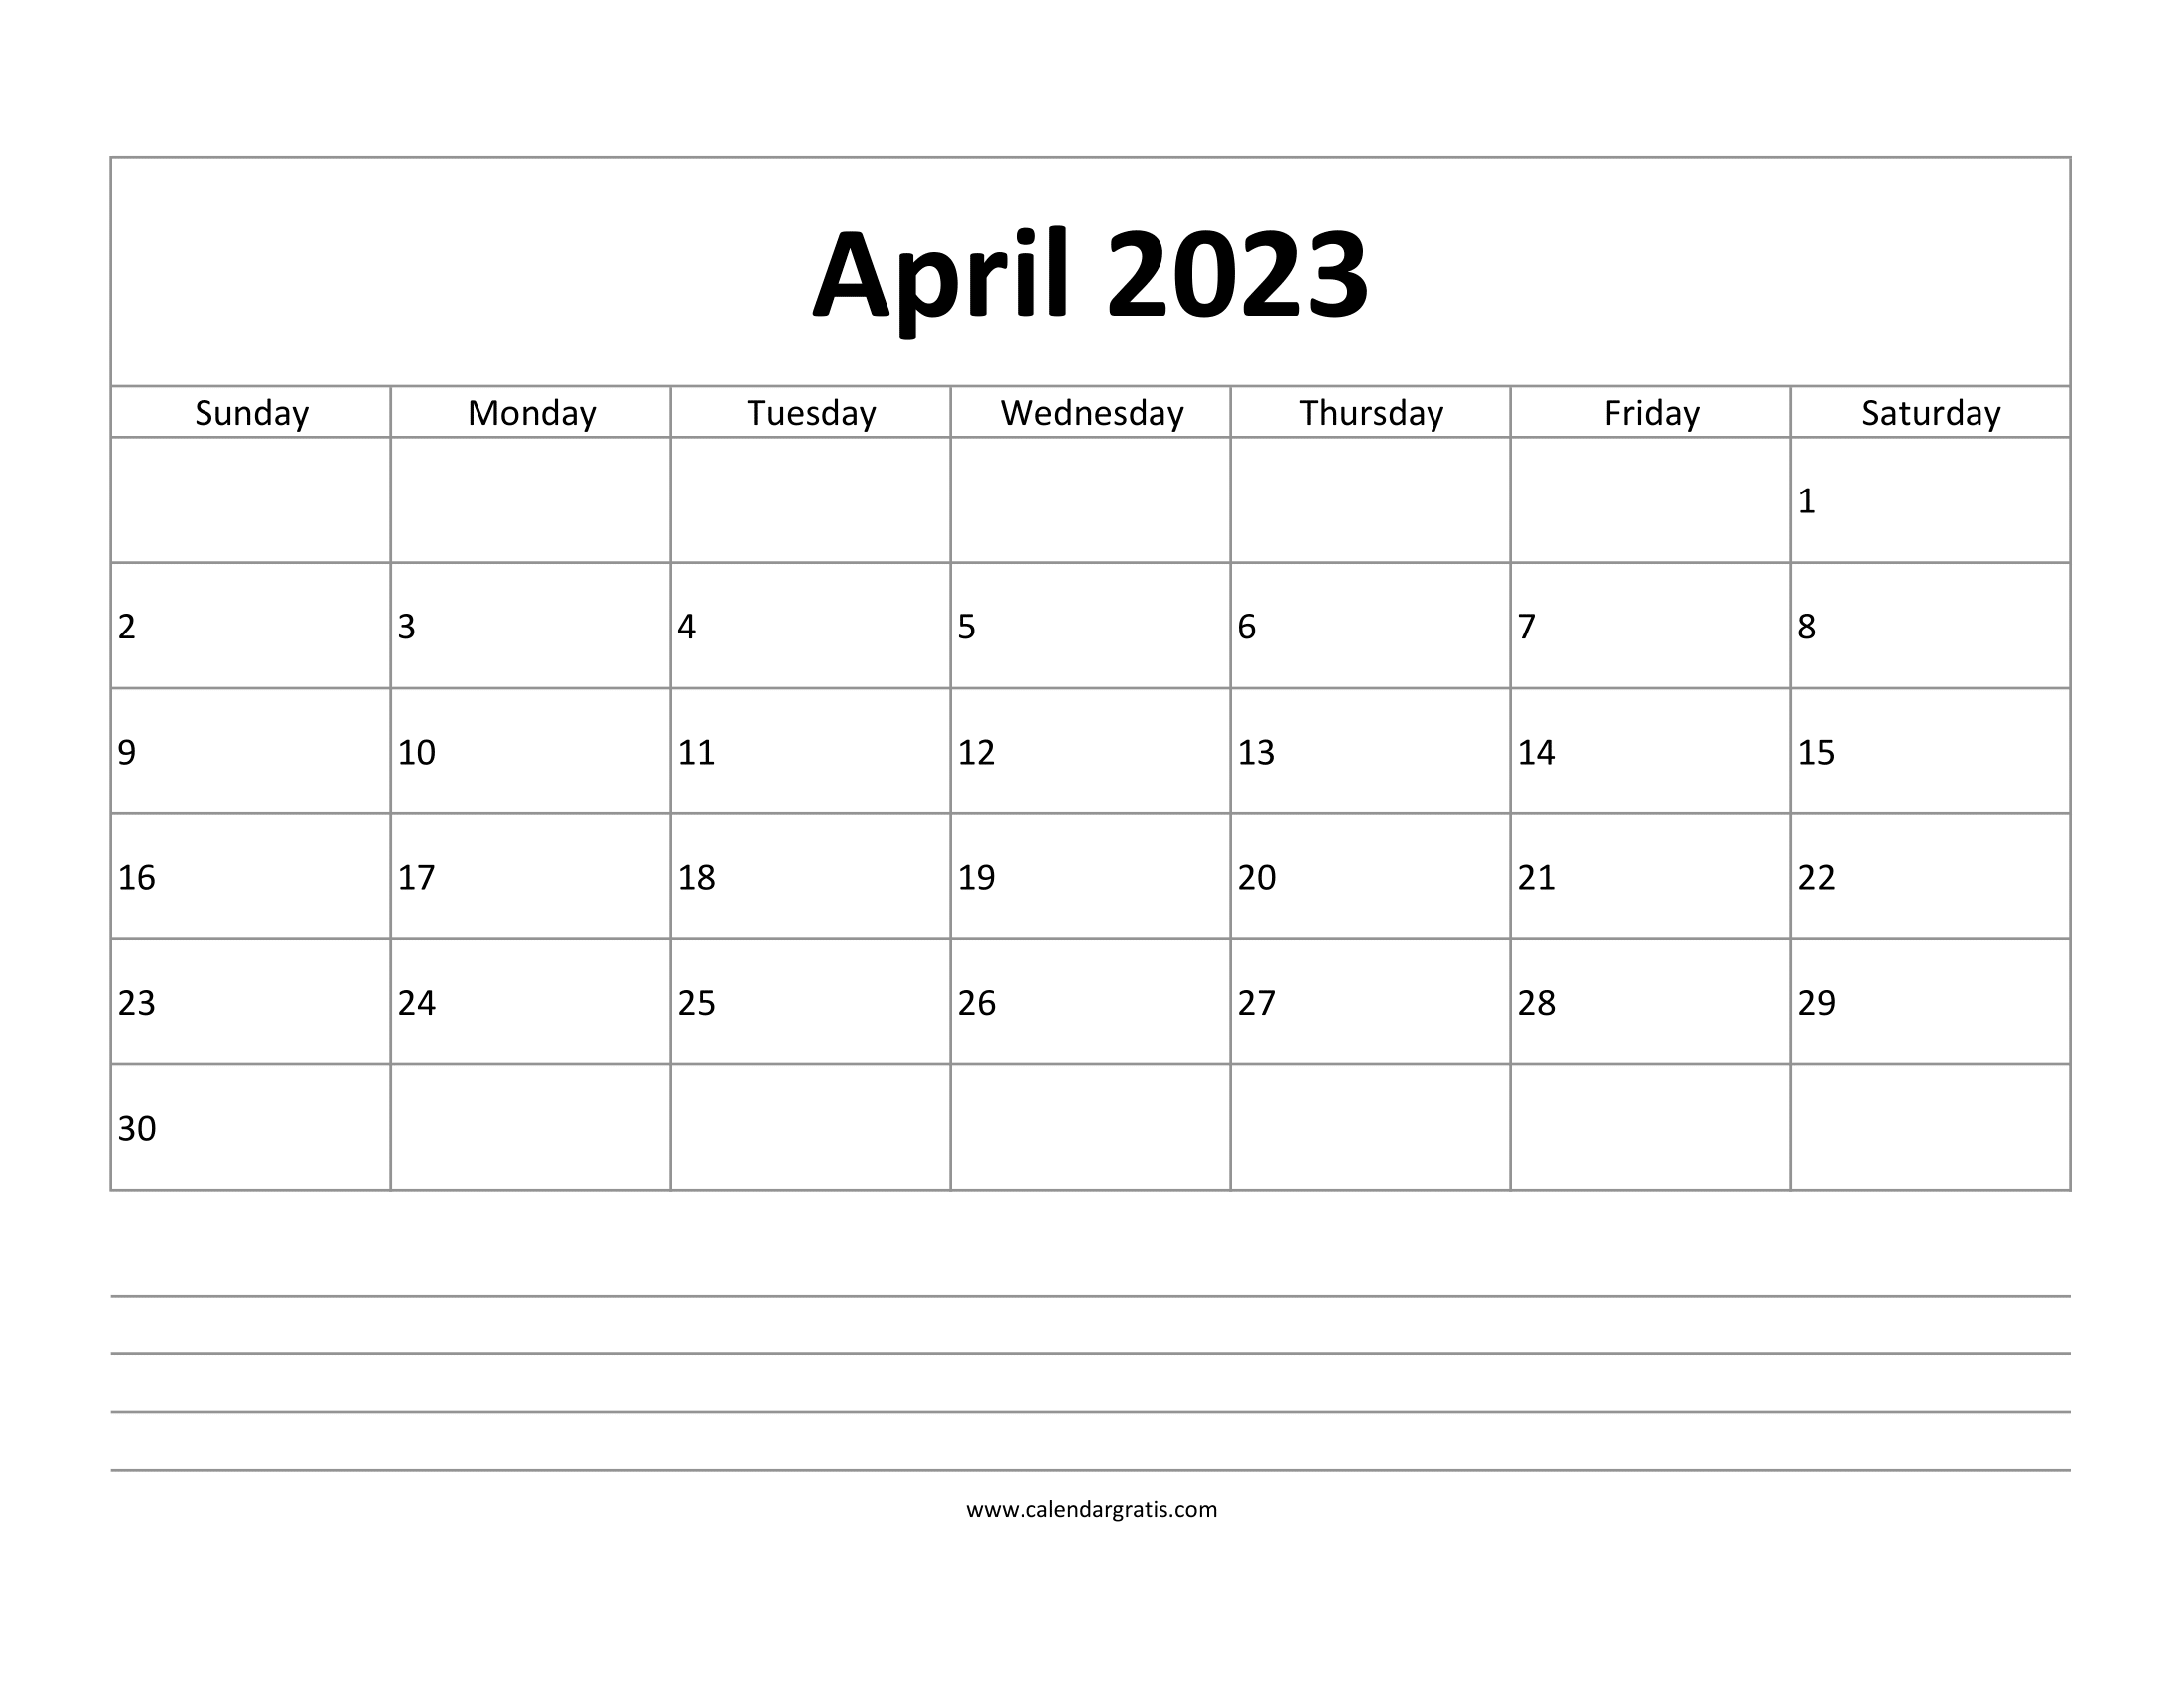 Free printable April 2023 calendar with notes, lines, to-do list, and monthly goal planner.